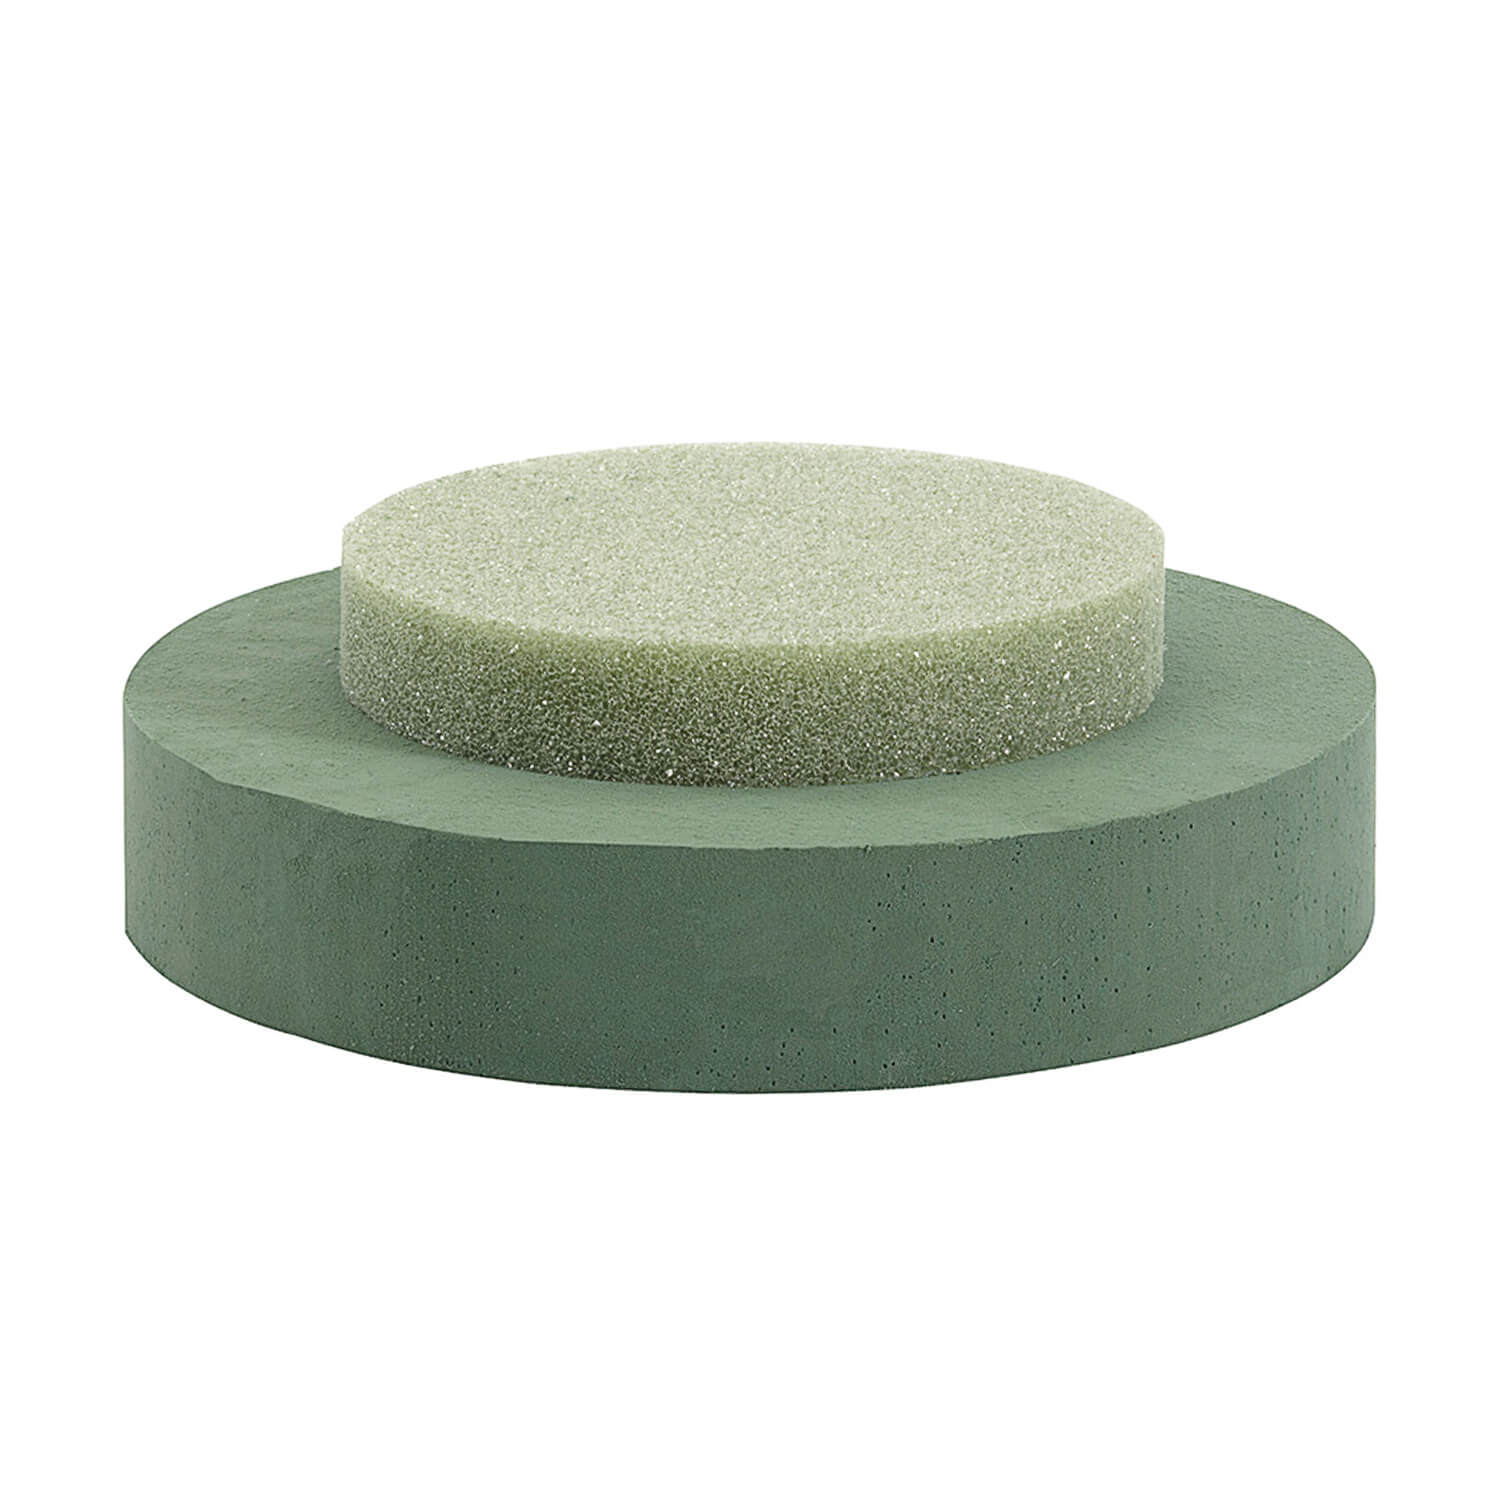 OASIS Floral Foam Riser - Round - 1/Pack